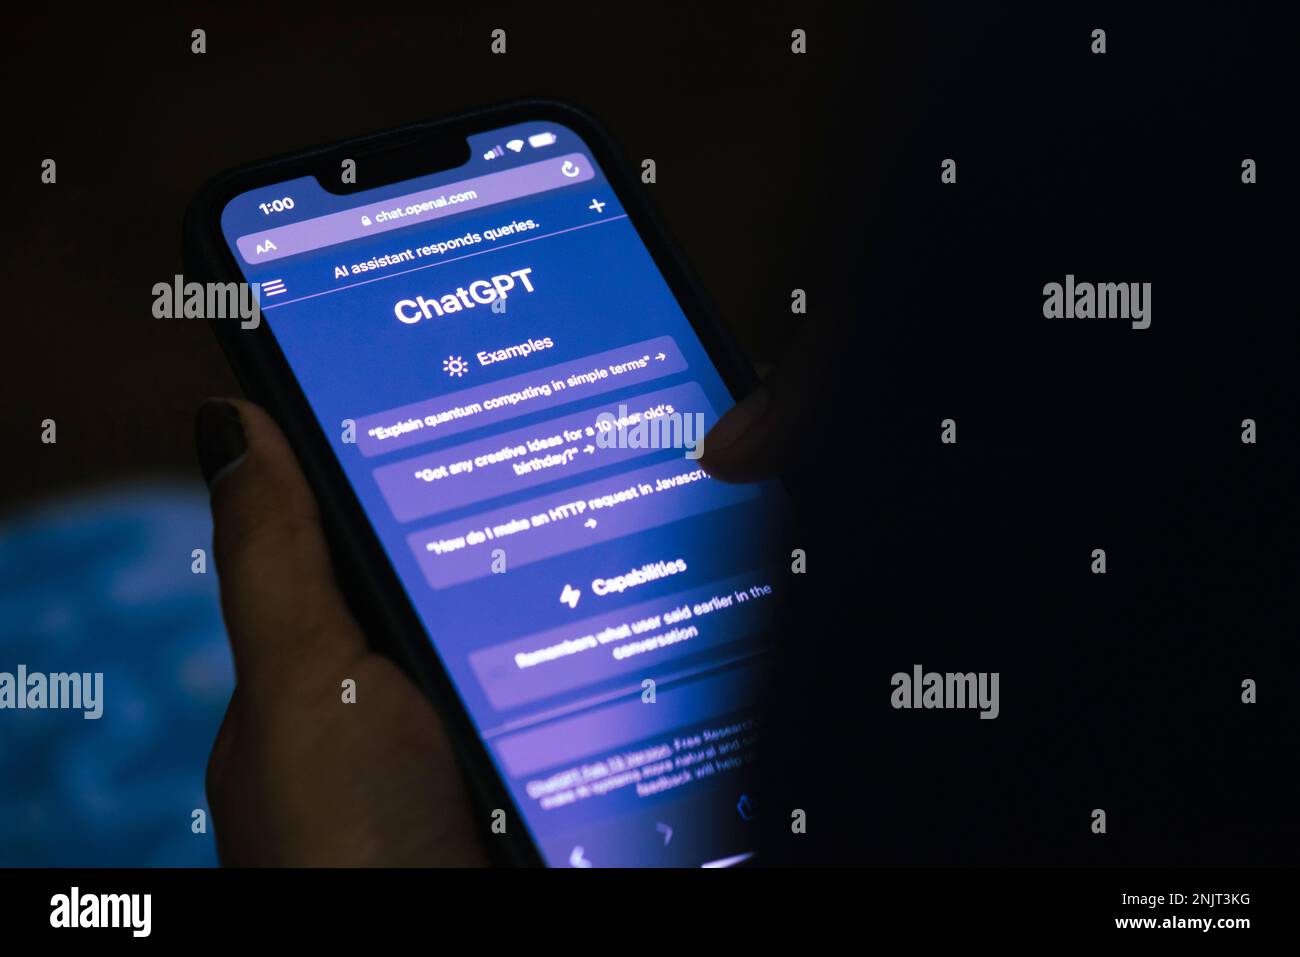 In this photo illustration, a person browses ChatGPT, a chatbot launched by OpenAI, on a smartphone, on February 23, 2023 in Guwahati, India. ChatGPT is a popular artificial intelligence chatbot, which has reached over 100 million users in two months after launch. Credit: David Talukdar/Alamy Live News Stock Photo